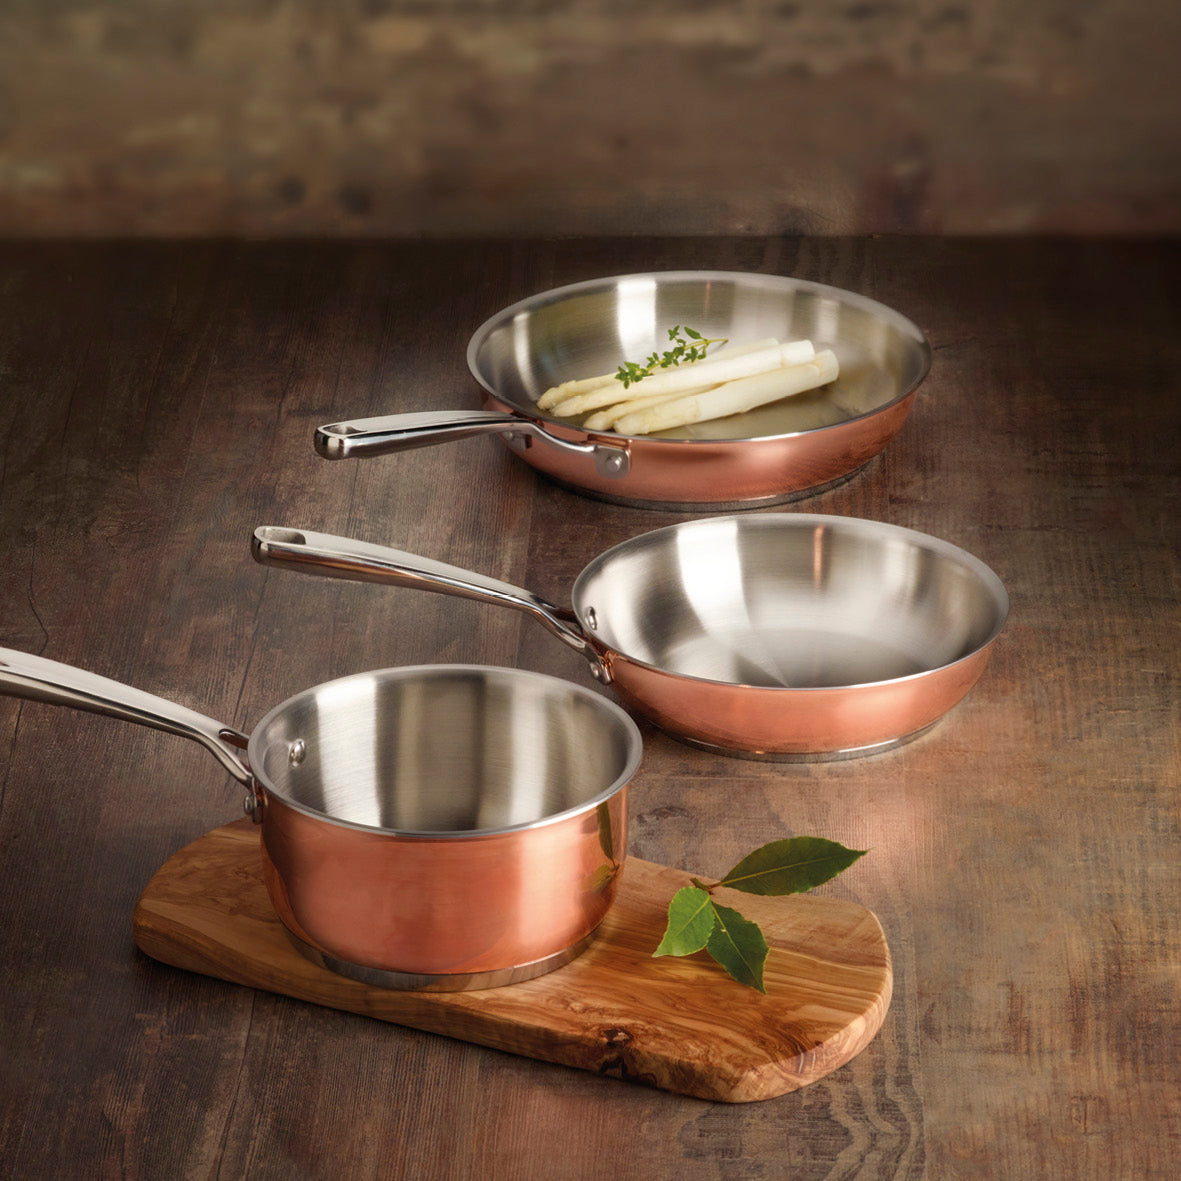 Stainless steel triply copper saucepan - Copper